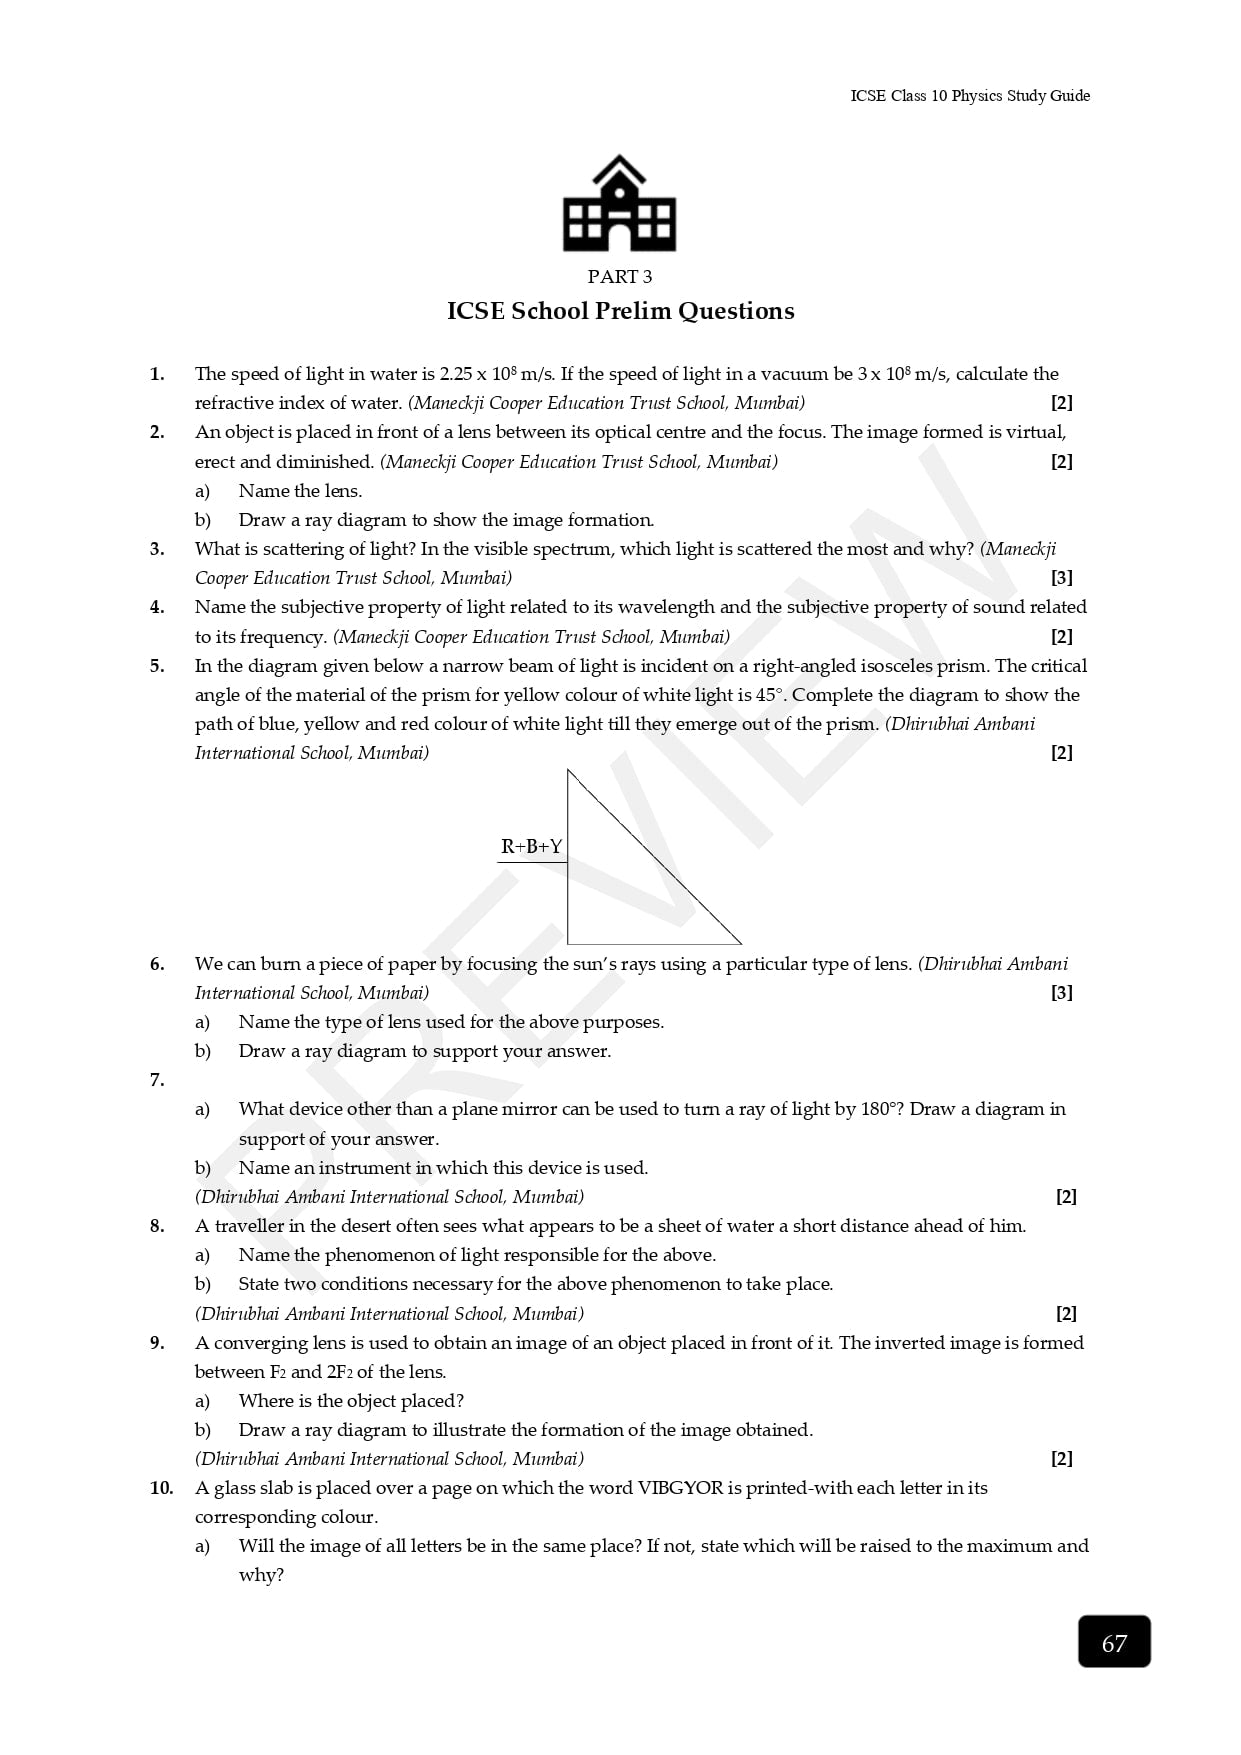 ICSE Physics revision notes for Class 10